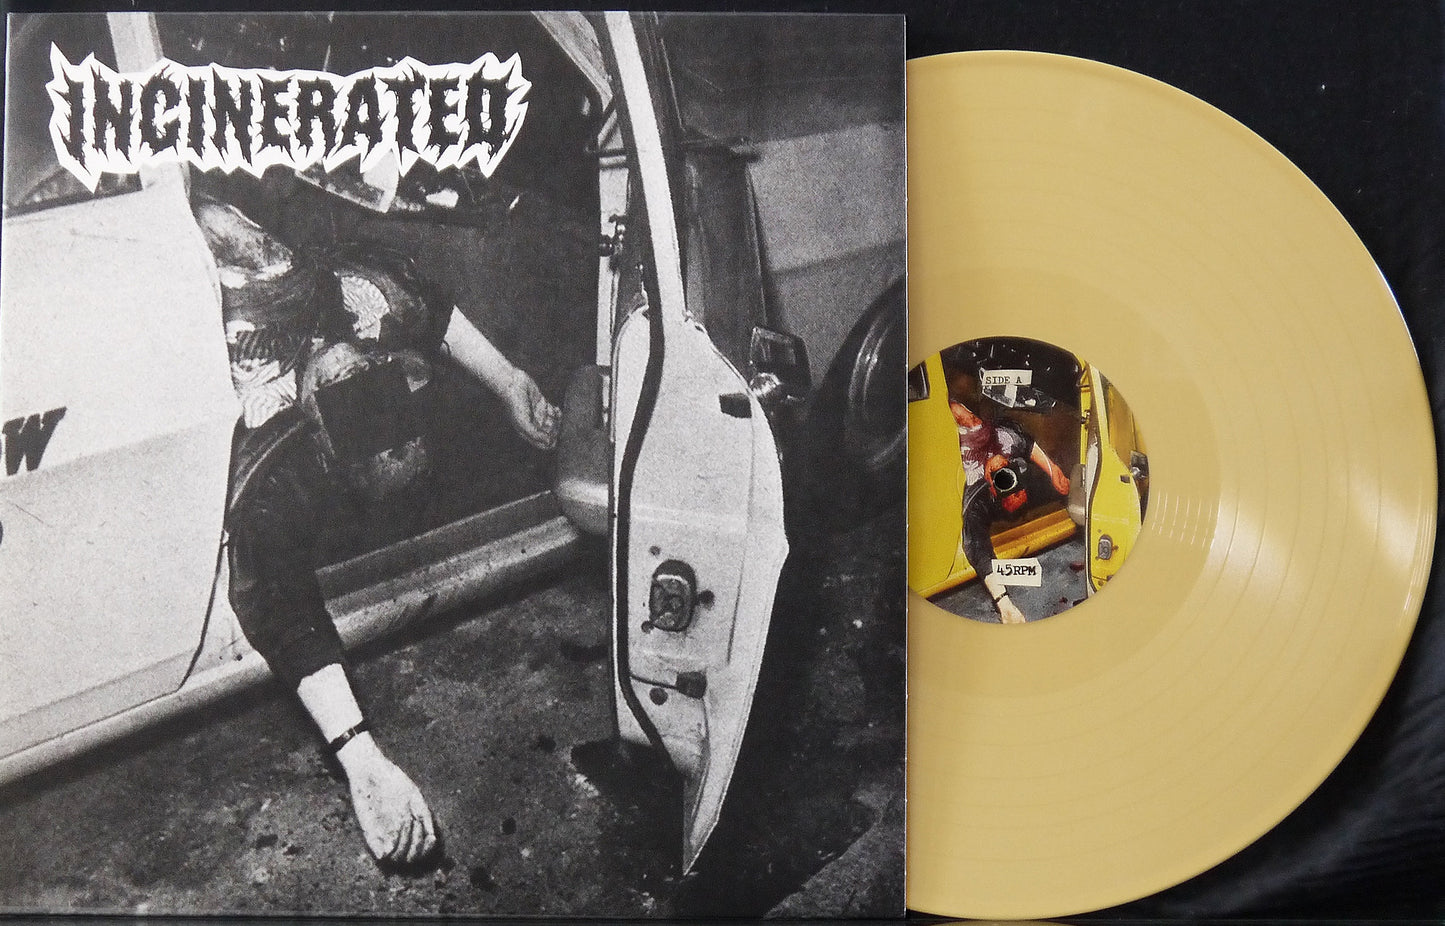 INCINERATED - Lobotomise 12"